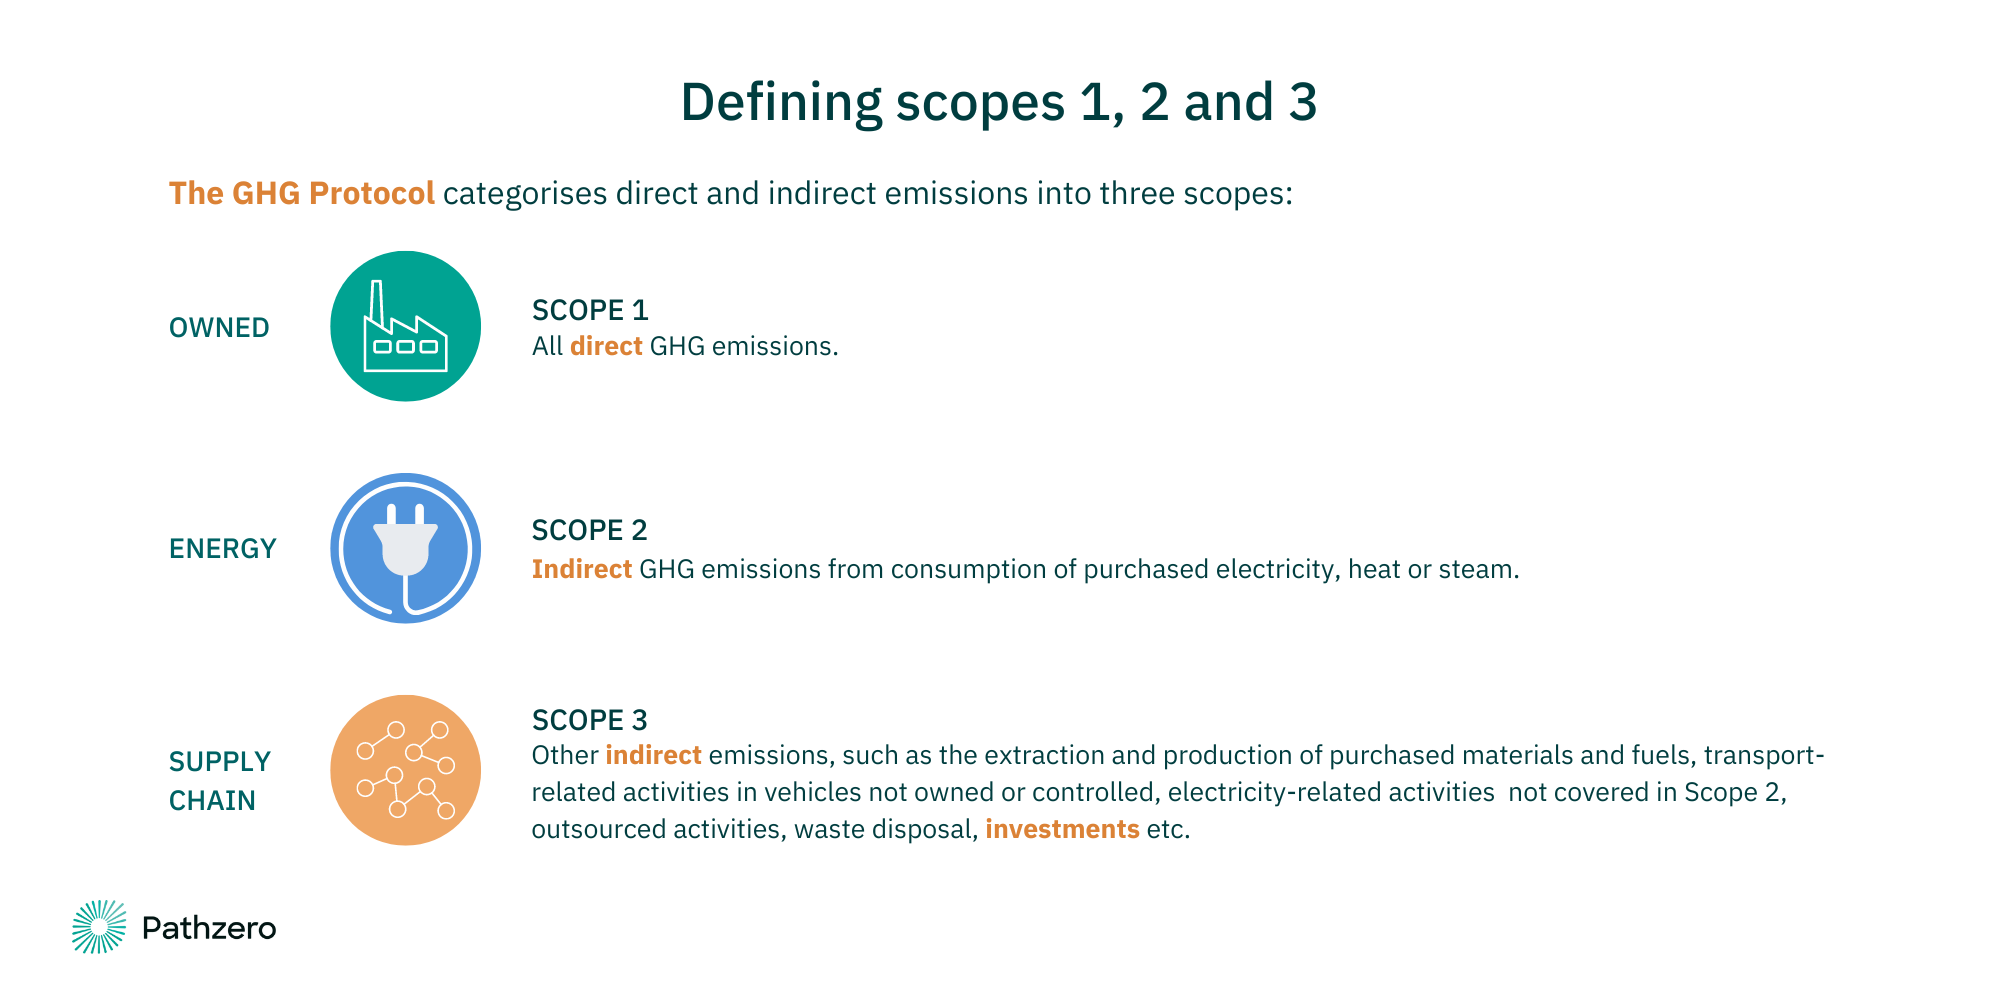 Defining scopes 1, 2 and 3